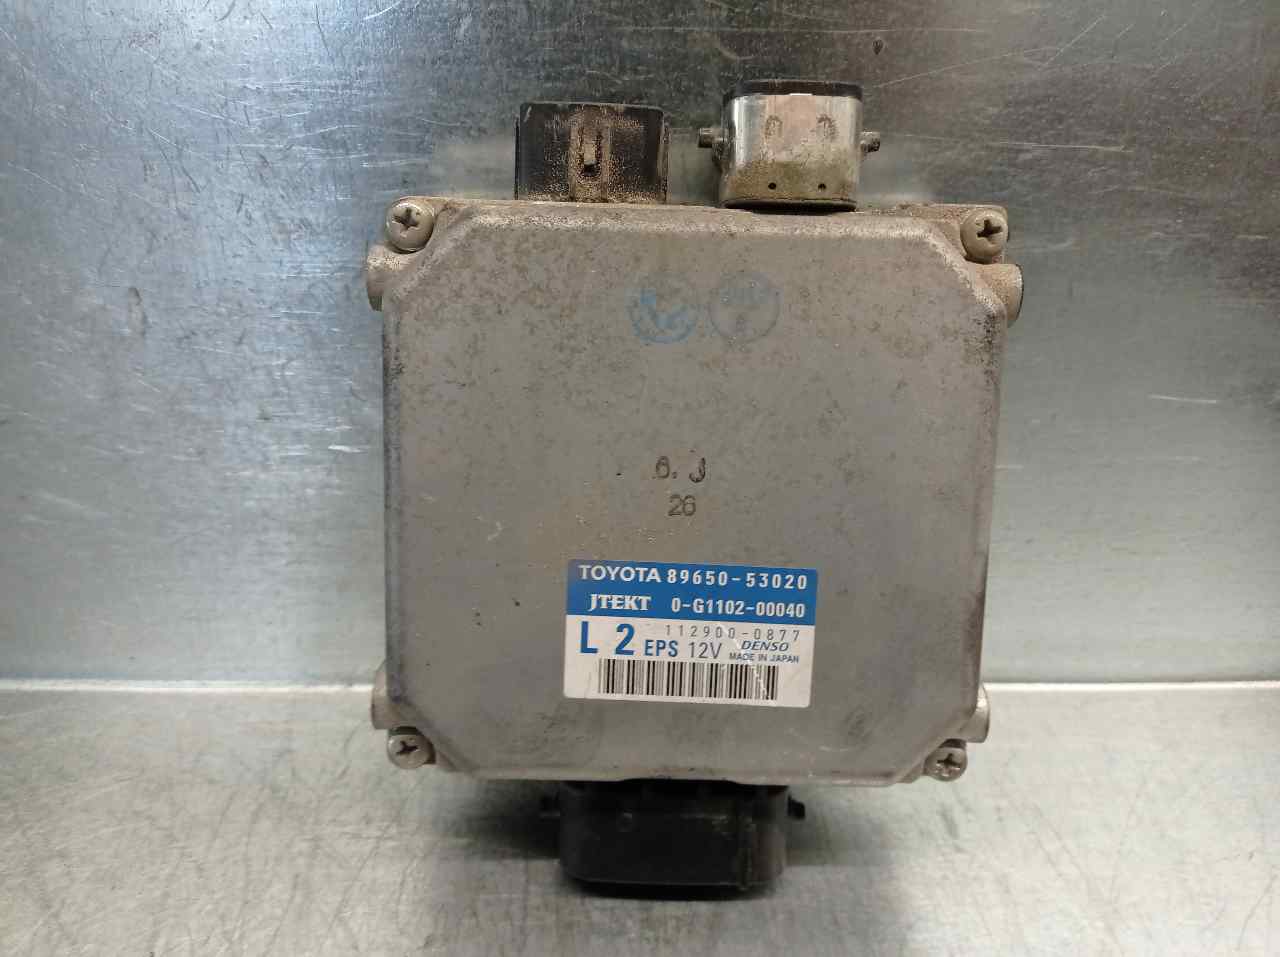 LEXUS IS XE20 (2005-2013) Other Control Units 8965053020, 0G110200040, DENSO 19789093